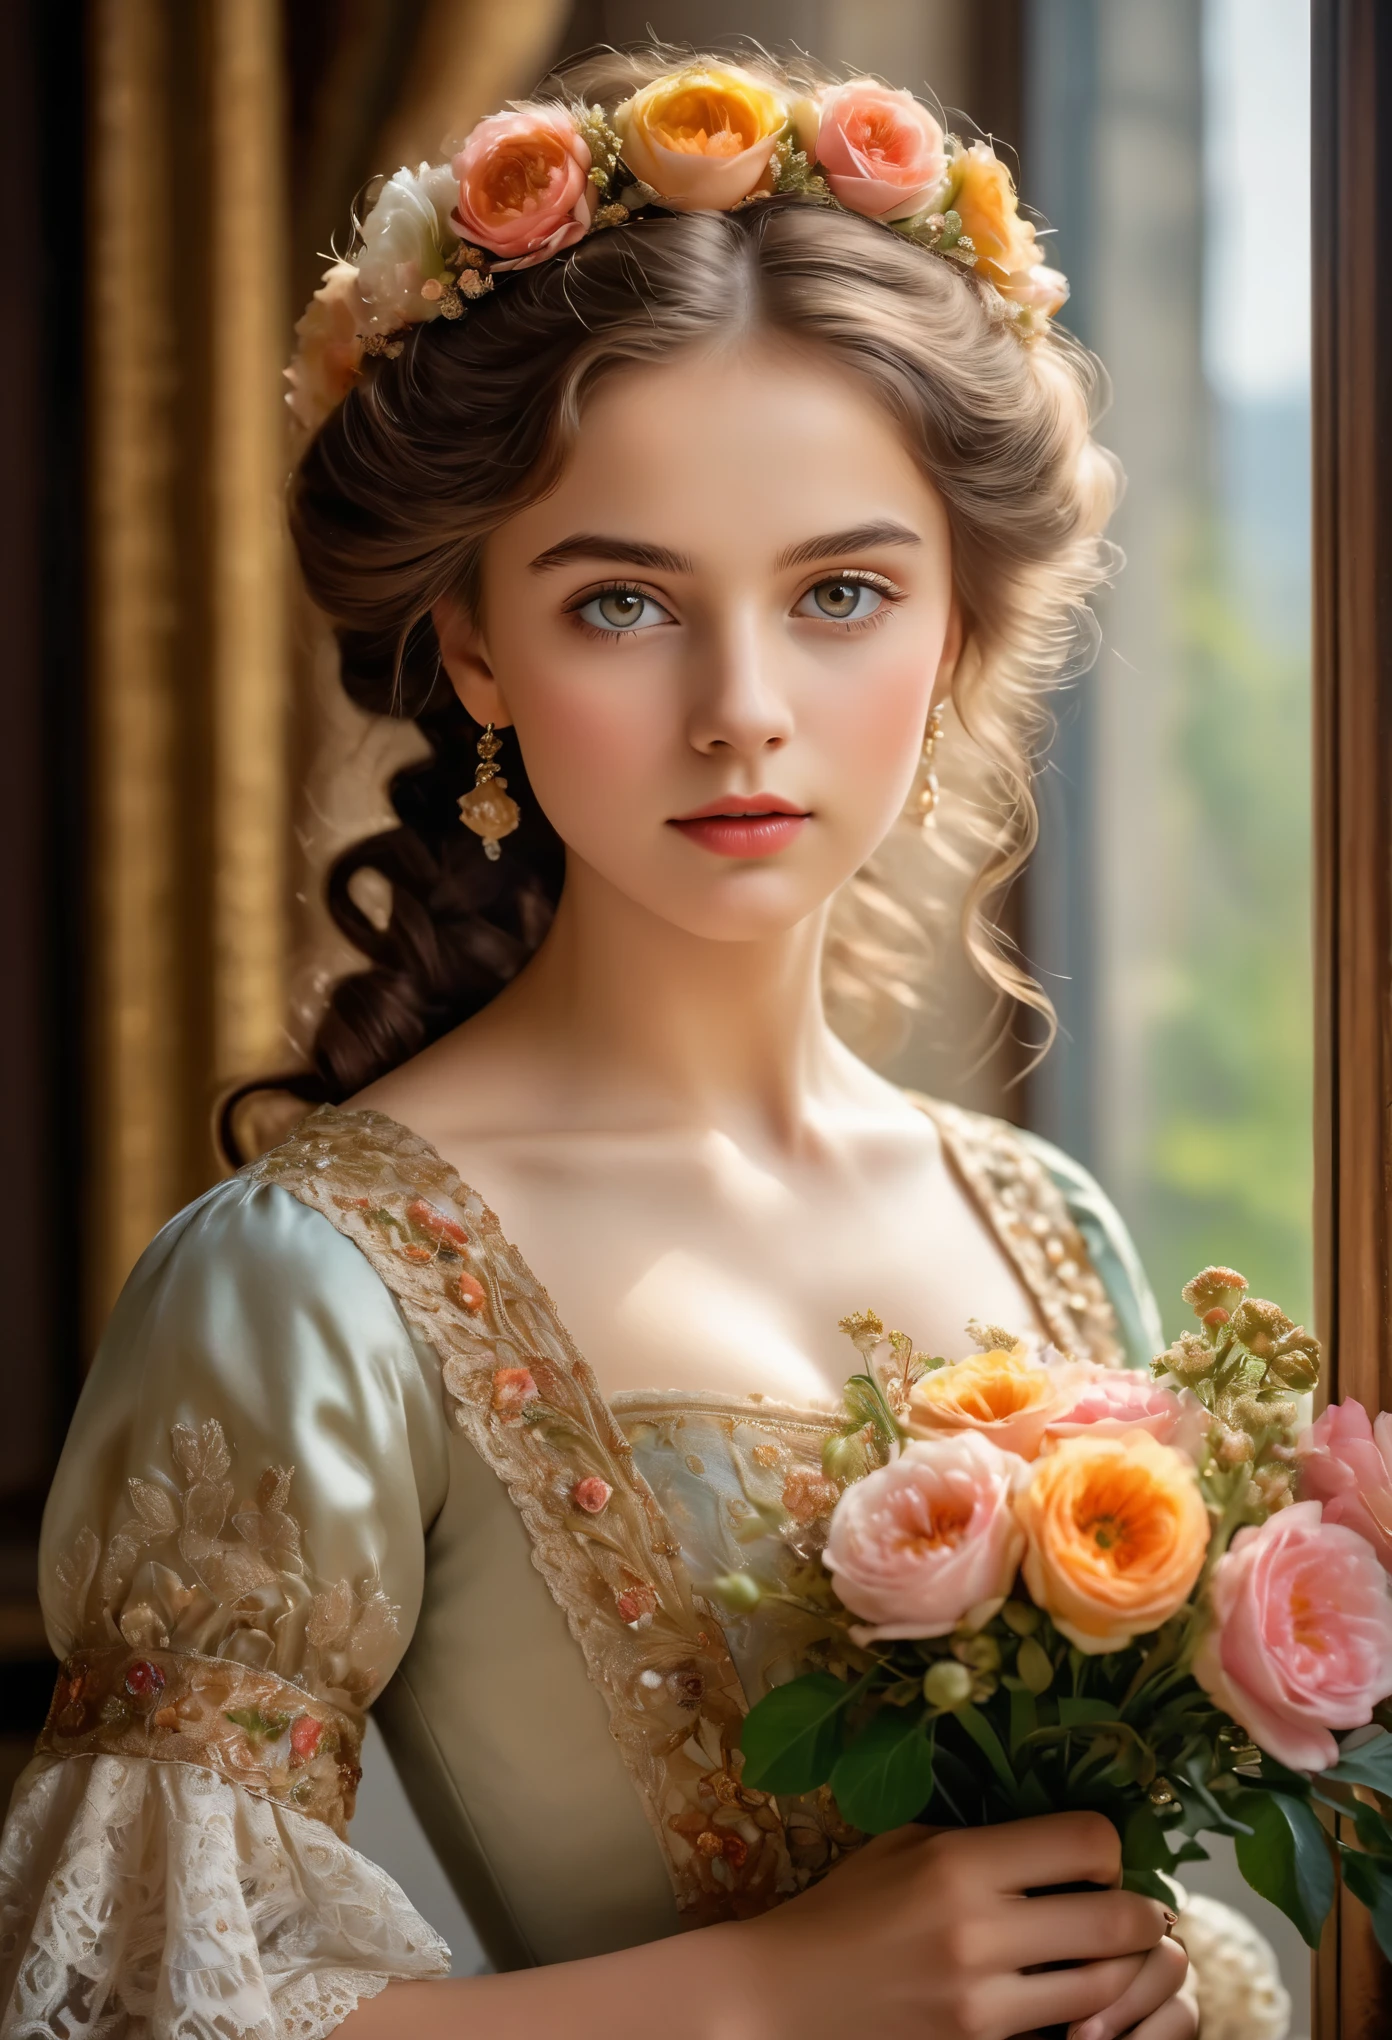 Portrait of a Beautiful 16-year-old German Girl in 19th Century Munich 

medium: oil painting
beautiful detailed eyes, beautiful detailed lips, extremely detailed eyes and face, long eyelashes
chestnut brown hair in elaborate curls, styled with a delicate floral hair accessory
elegant and ornate dress in vibrant colors, adorned with delicate lace and embroidery
perfectly manicured hands holding a bouquet of fresh flowers
soft and glowing skin, with a healthy rosy complexion
subtle expression of youthful innocence and curiosity in her eyes
graceful posture and gentle smile, radiating timeless charm
faint sunlight gently filtering through a window, casting a warm glow on her face
impeccable attention to lighting and shading, emphasizing the girl's natural beauty
rich and vibrant color palette, capturing the elegance and opulence of 19th century Munich
subtle brushstrokes and fine details, showcasing the artist's skill and mastery of the medium
(masterpiece:1.2), ultra-detailed, (photorealistic:1.37), HDR, UHD, professional
classic portrait style, reminiscent of the great masters of the era
overall warm and inviting atmosphere, transporting the viewer to a bygone era